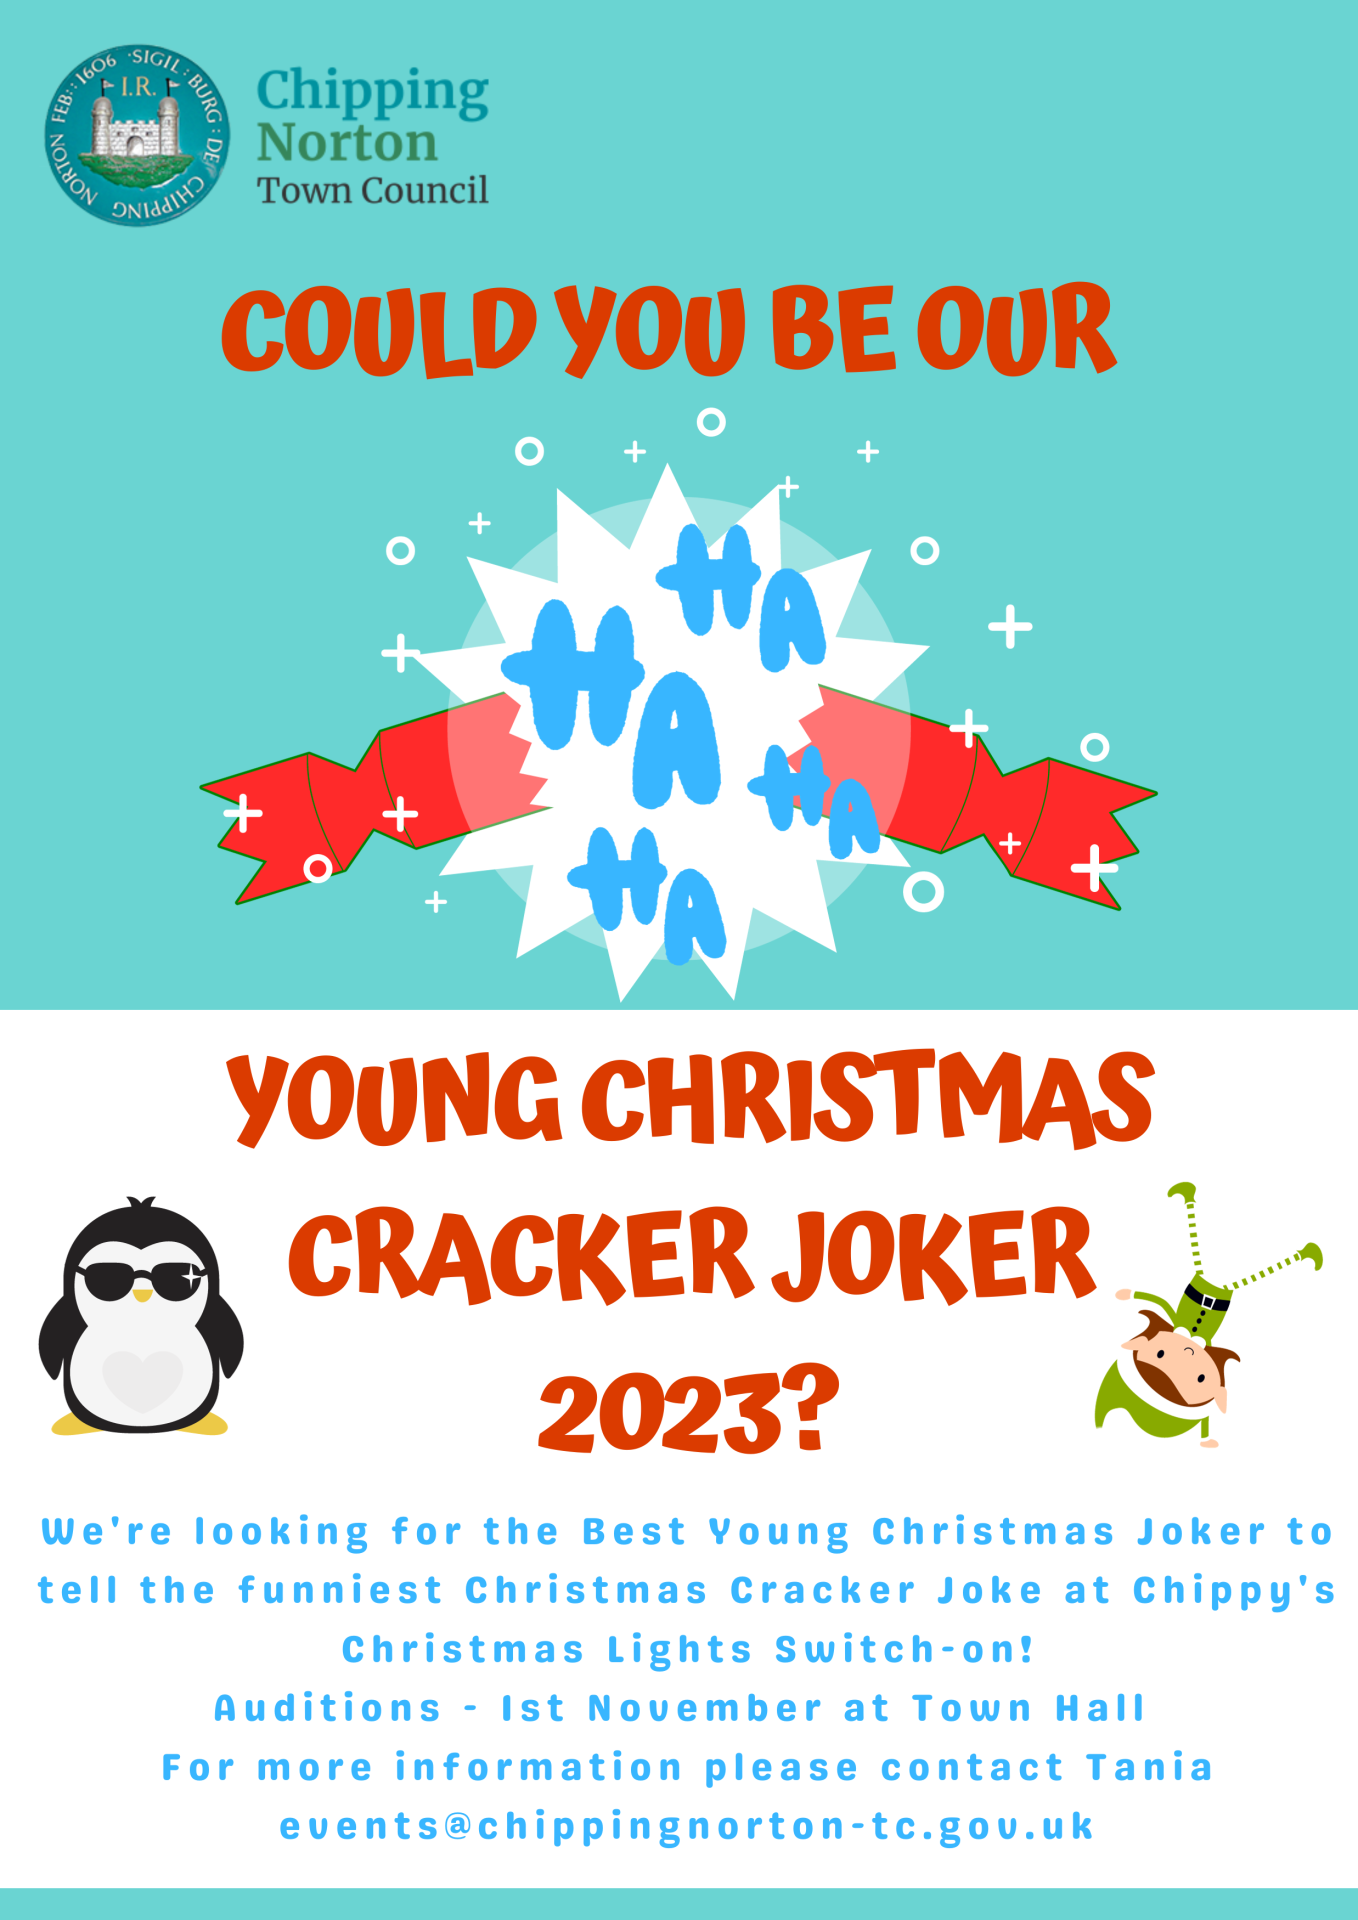 We're looking for the Best Young Christmas Joker to tell the funniest Christmas Cracker Joke at Chippy's Christmas Lights Switch-on!
Auditions - 1st November at Town Hall 
For more information please contact Tania events@chippingnorton-tc.gov.uk